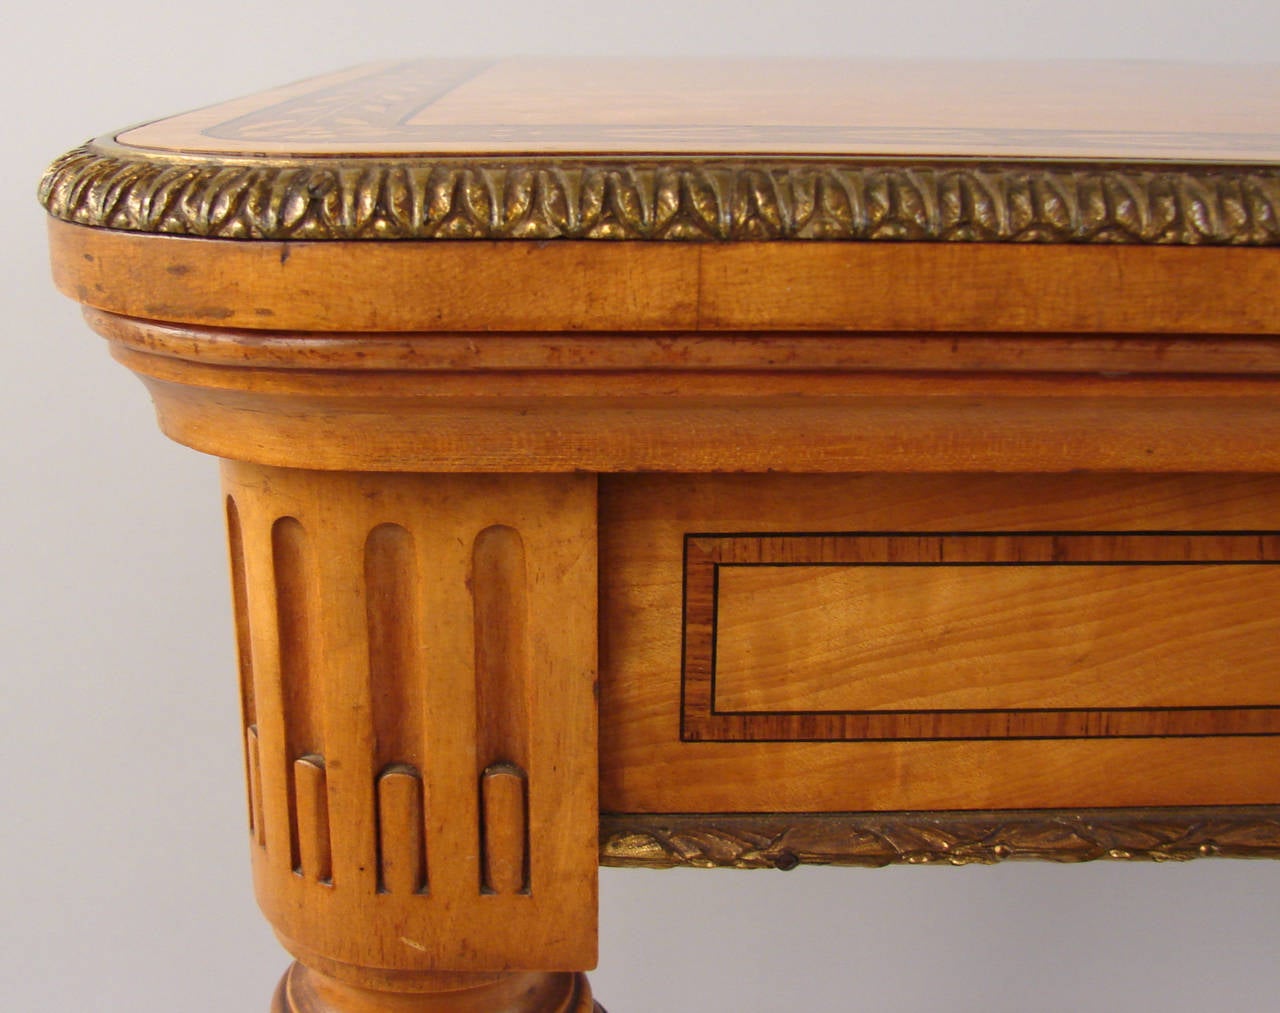 Superb Quality English Satinwood Bronze-Mounted Flip Top Games Table 1